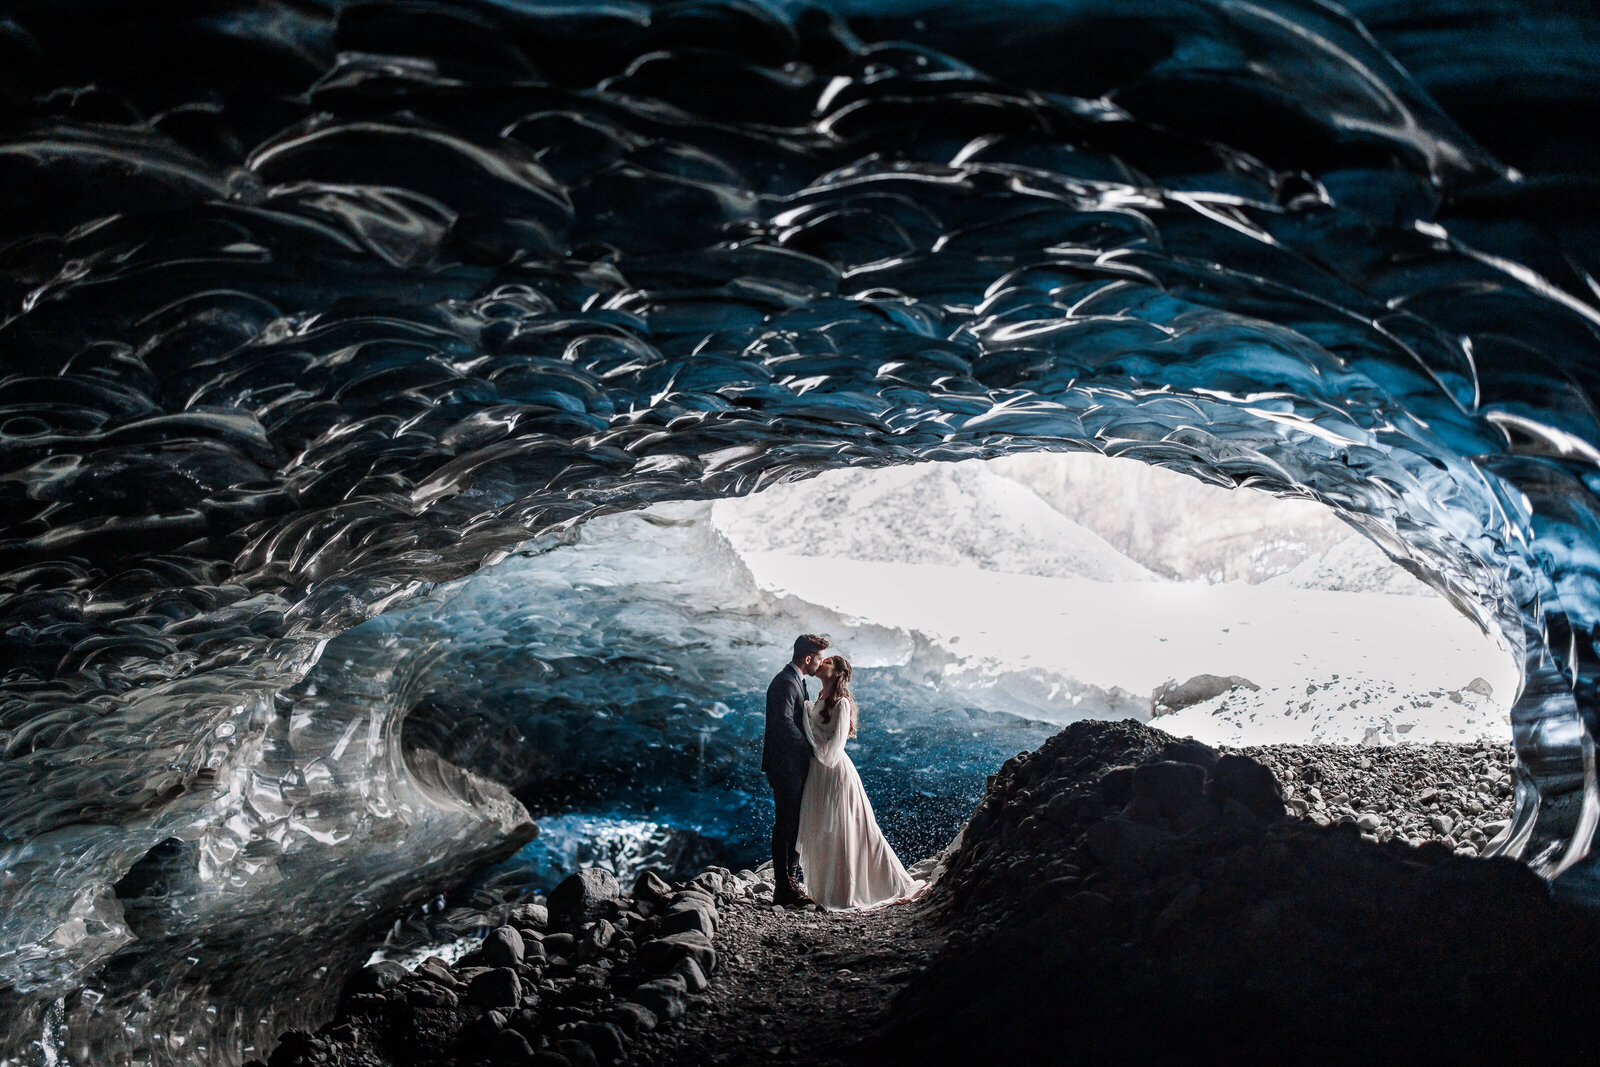 A couple elopes in a dreamy winter ice cave in Iceland.